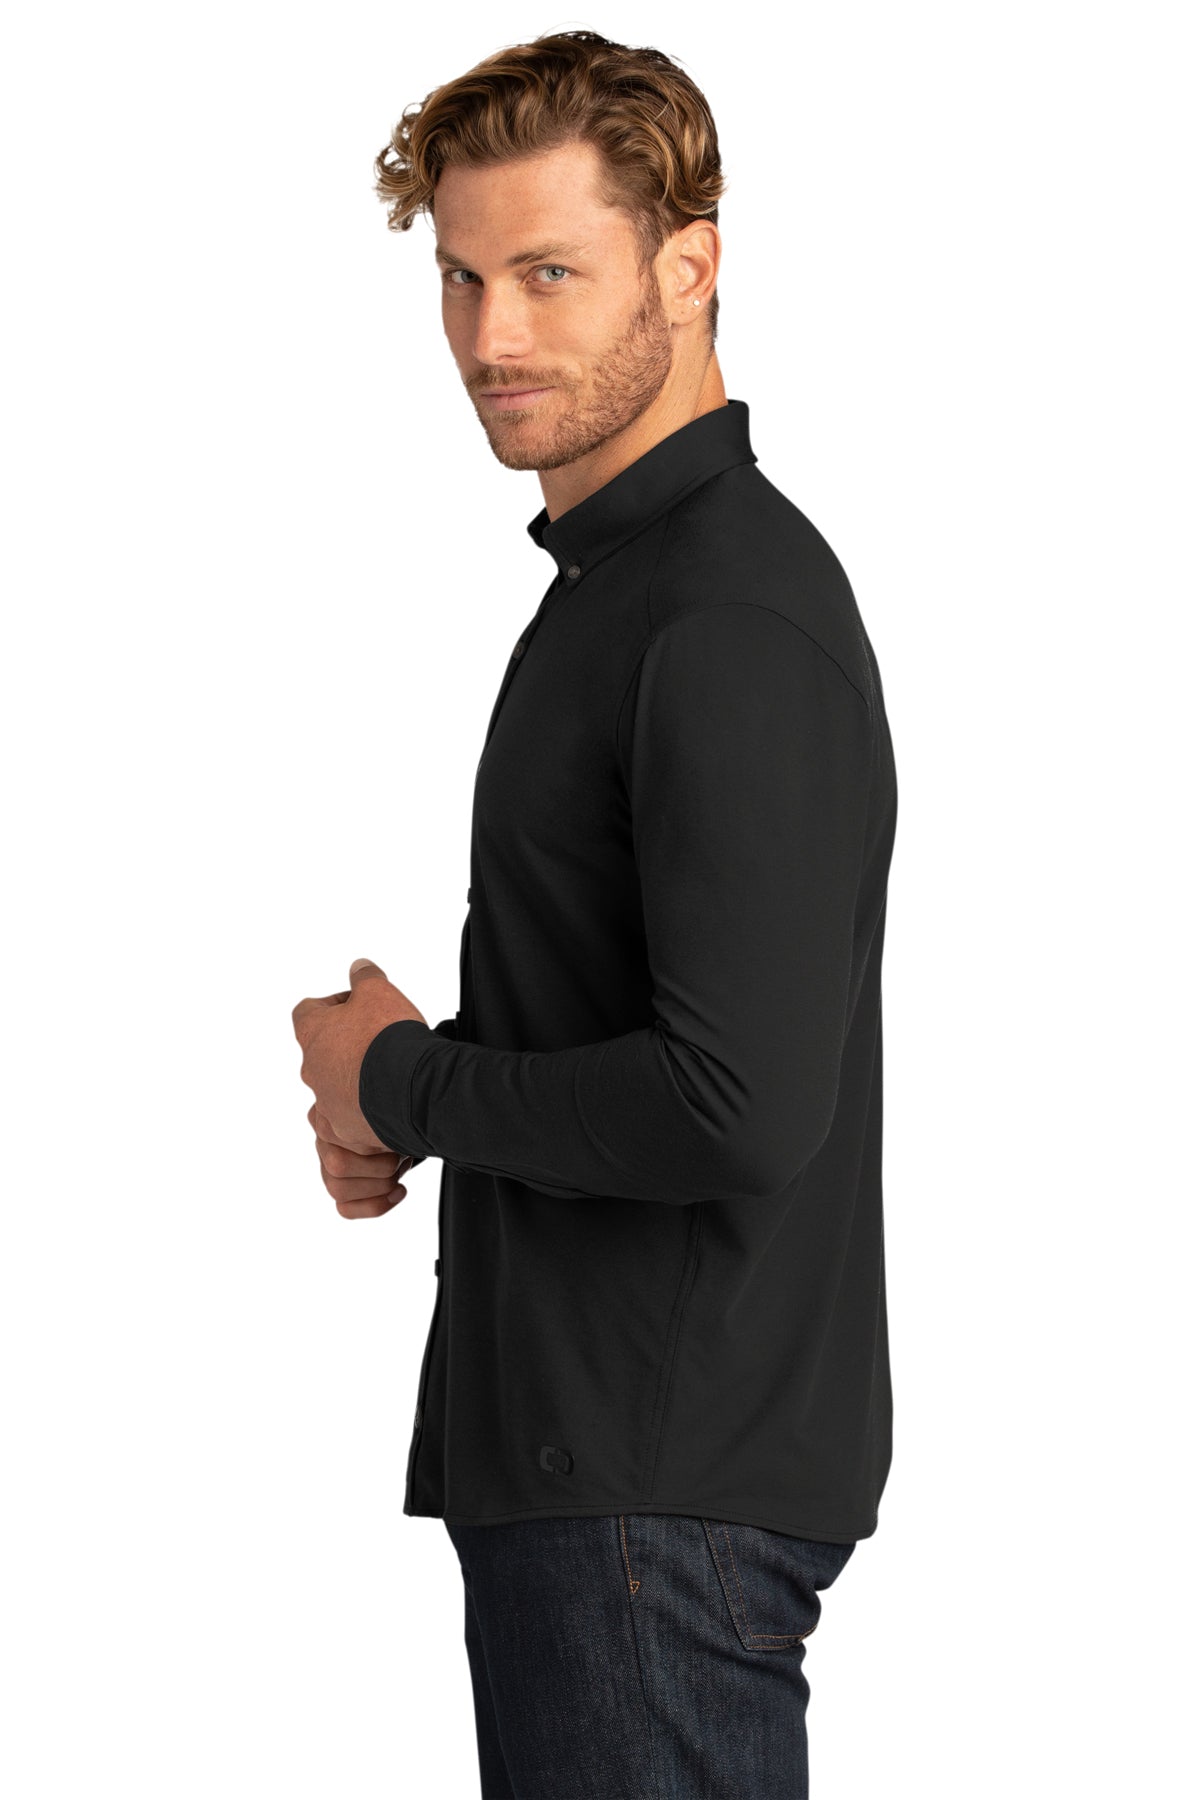 OGIO Code Stretch Long Sleeve Button-Up Blacktop